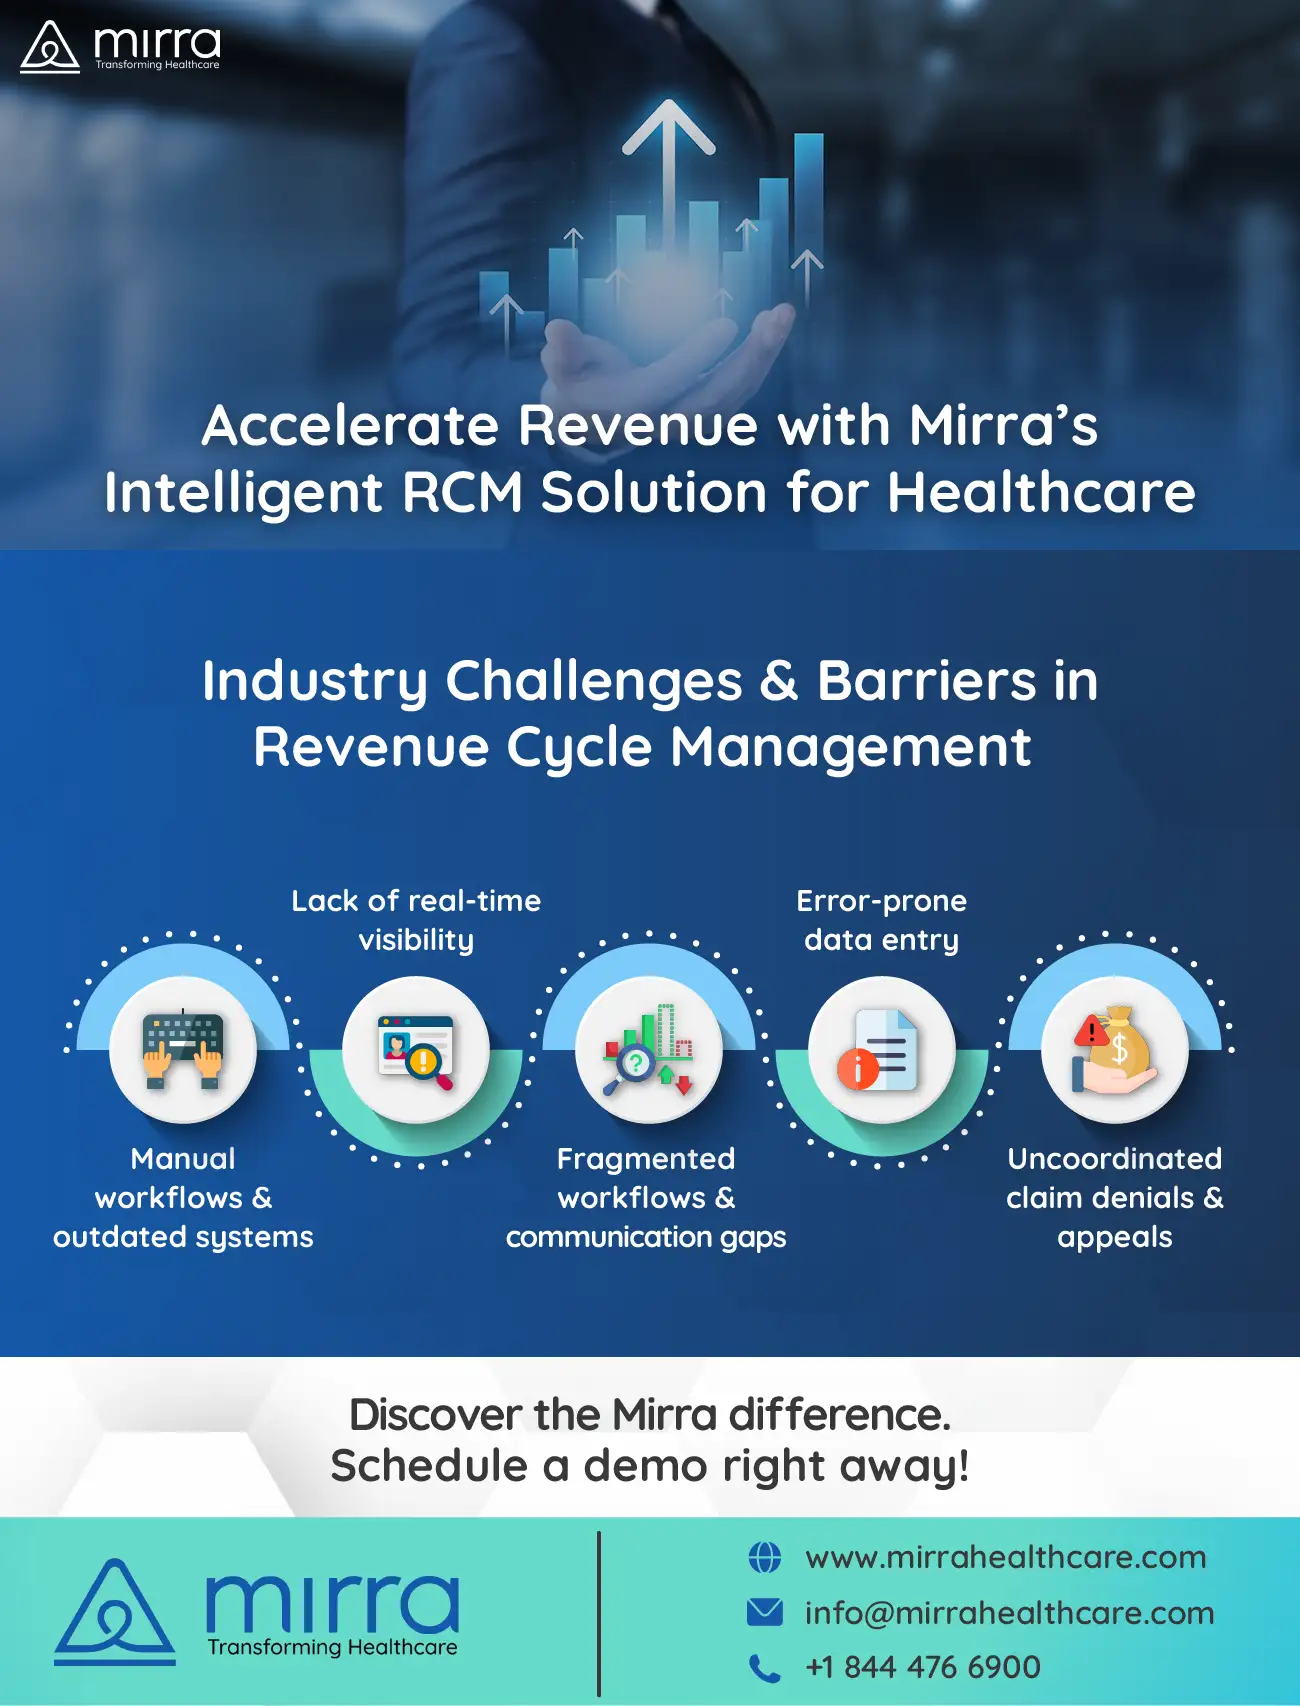 Accelerate Revenue with Mirra: Intelligent RCM Solution for Healthcare